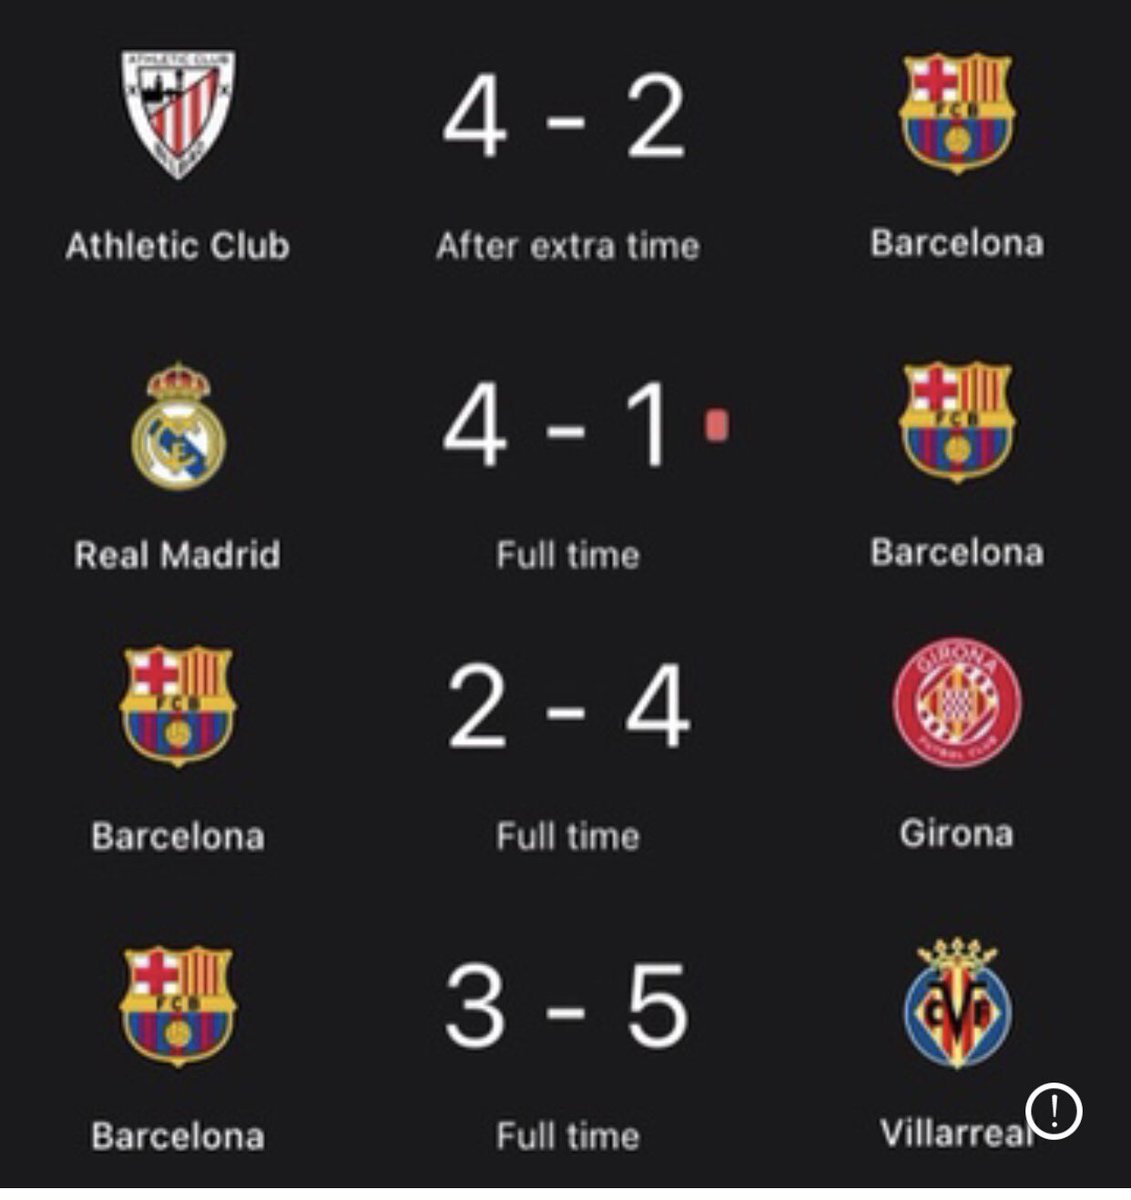 Best team in the world conceding 17goals in 4matches😭😭😭😭😭😭😭😭😭😭